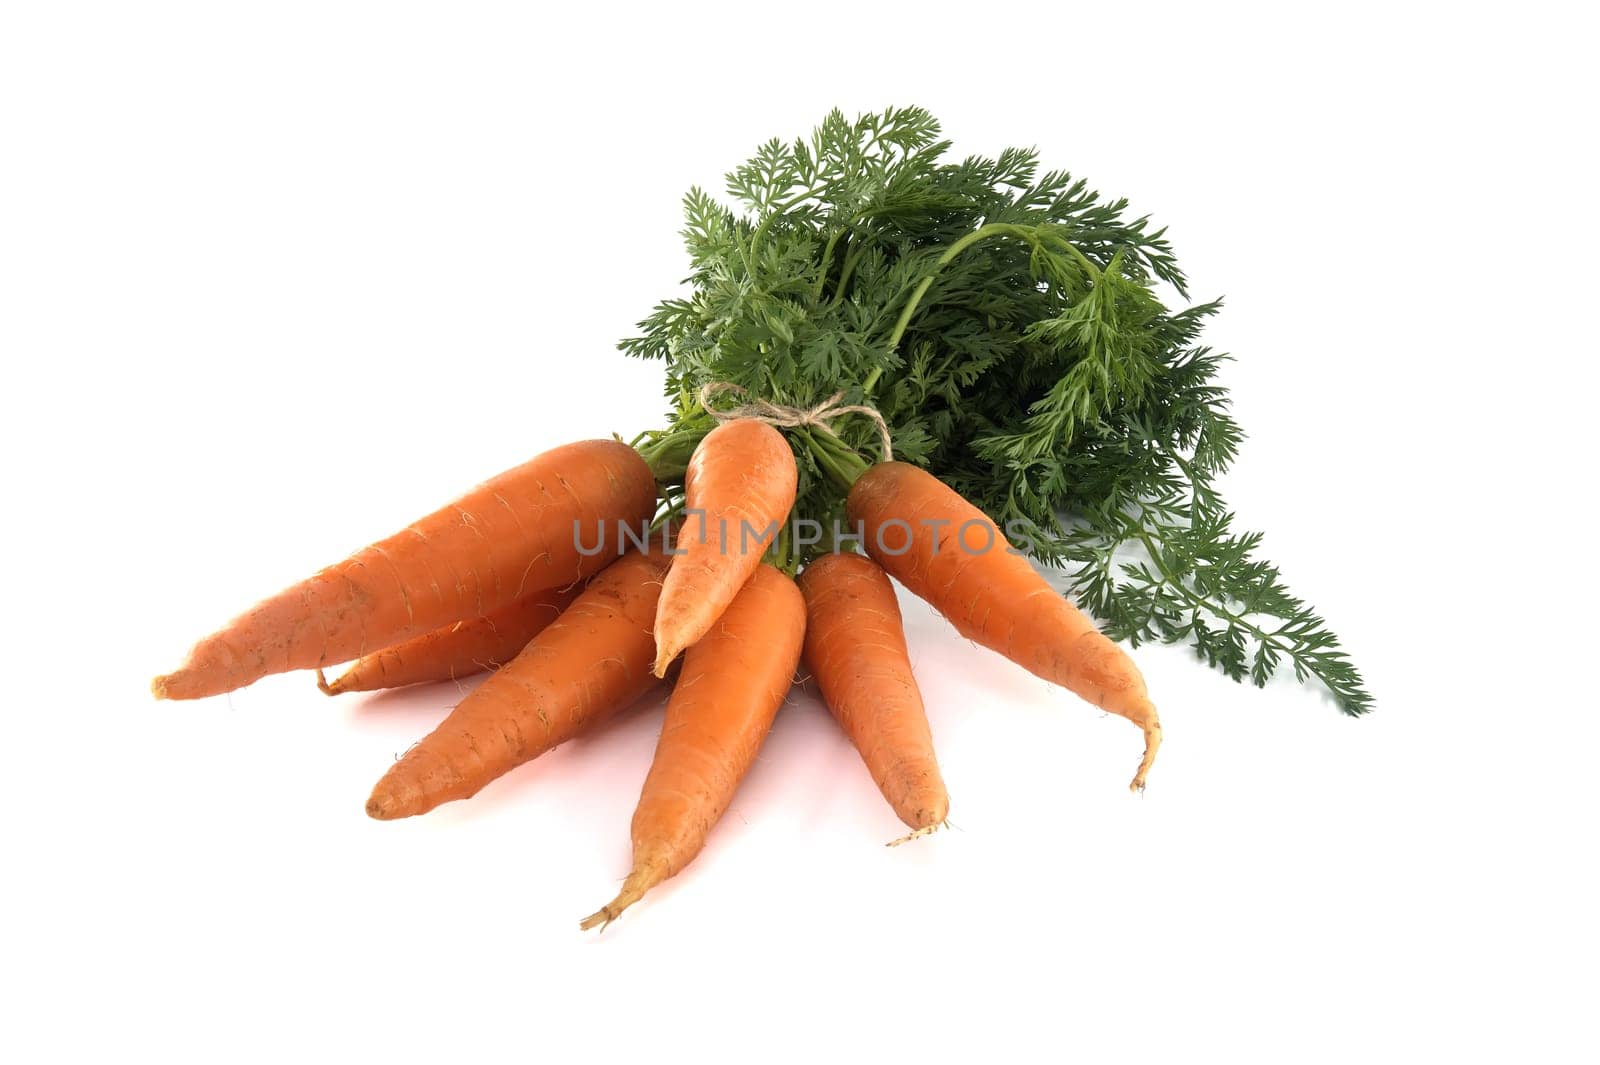 Fresh carrots with green leafy tops isolated on white by NetPix